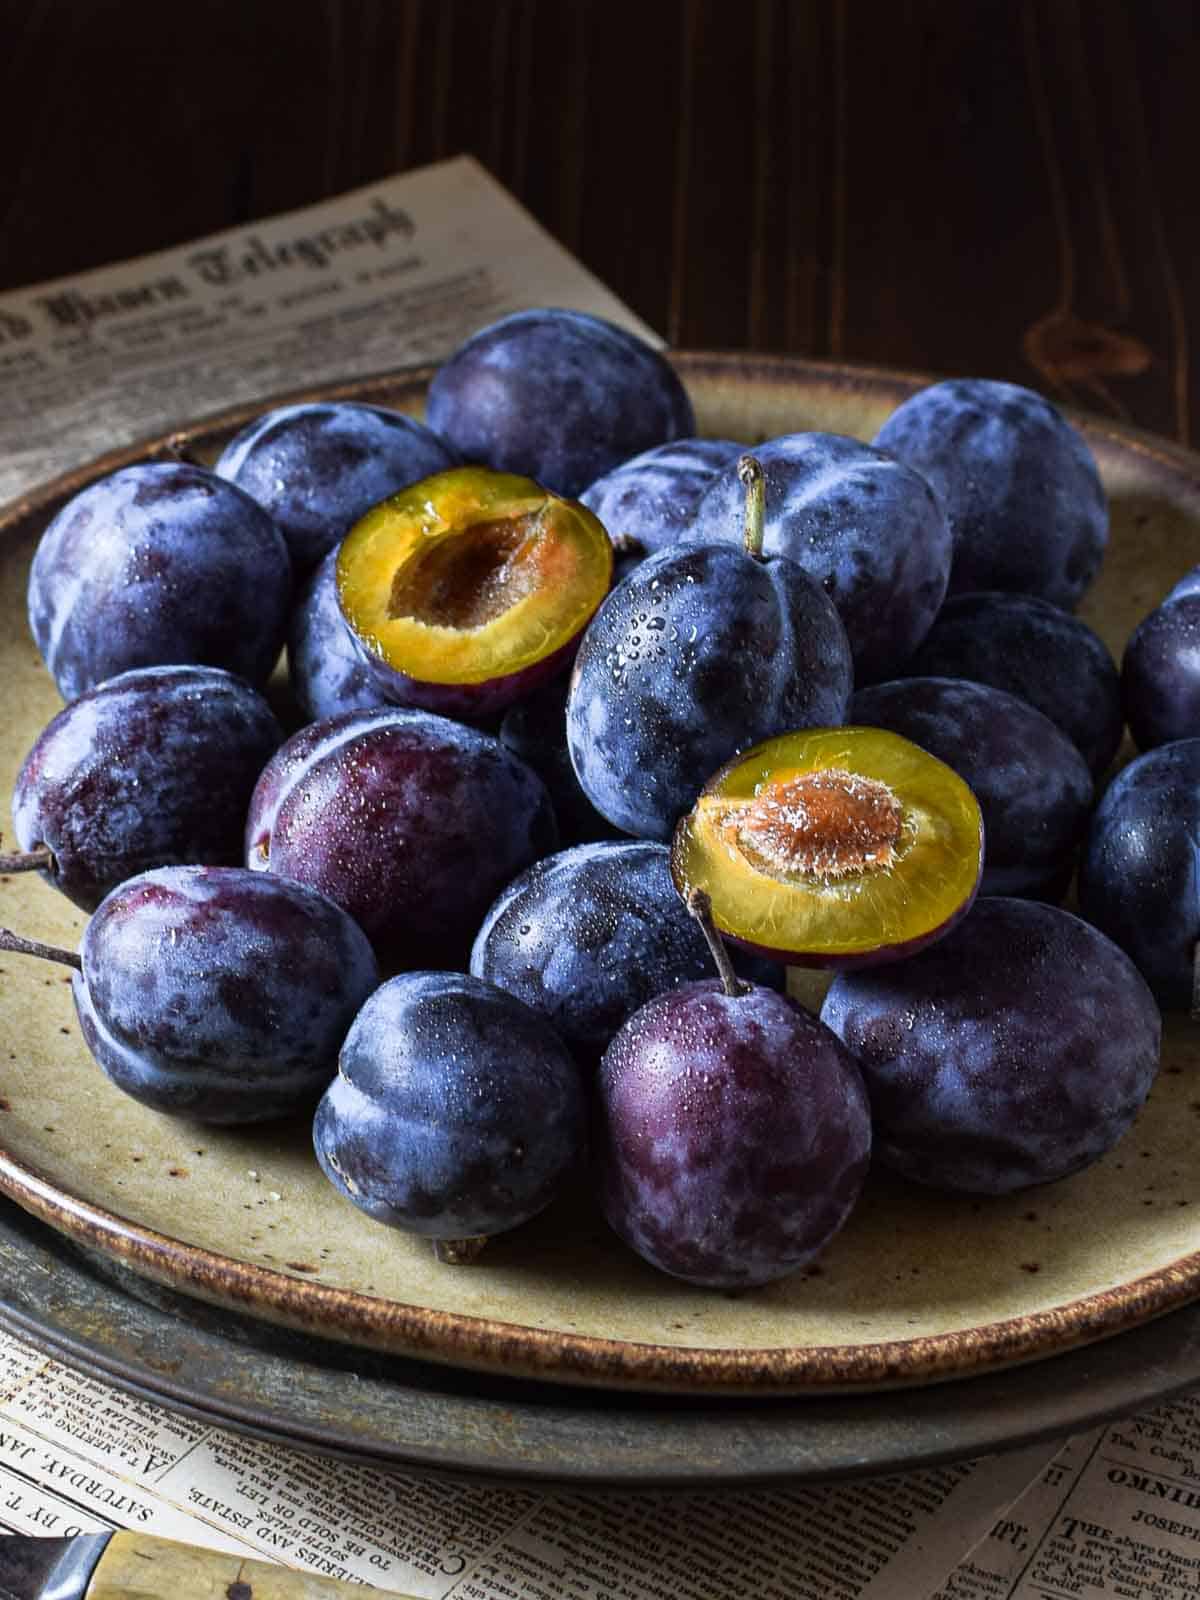 Italian plums stacked on a brown plate with 2 plums cut open.